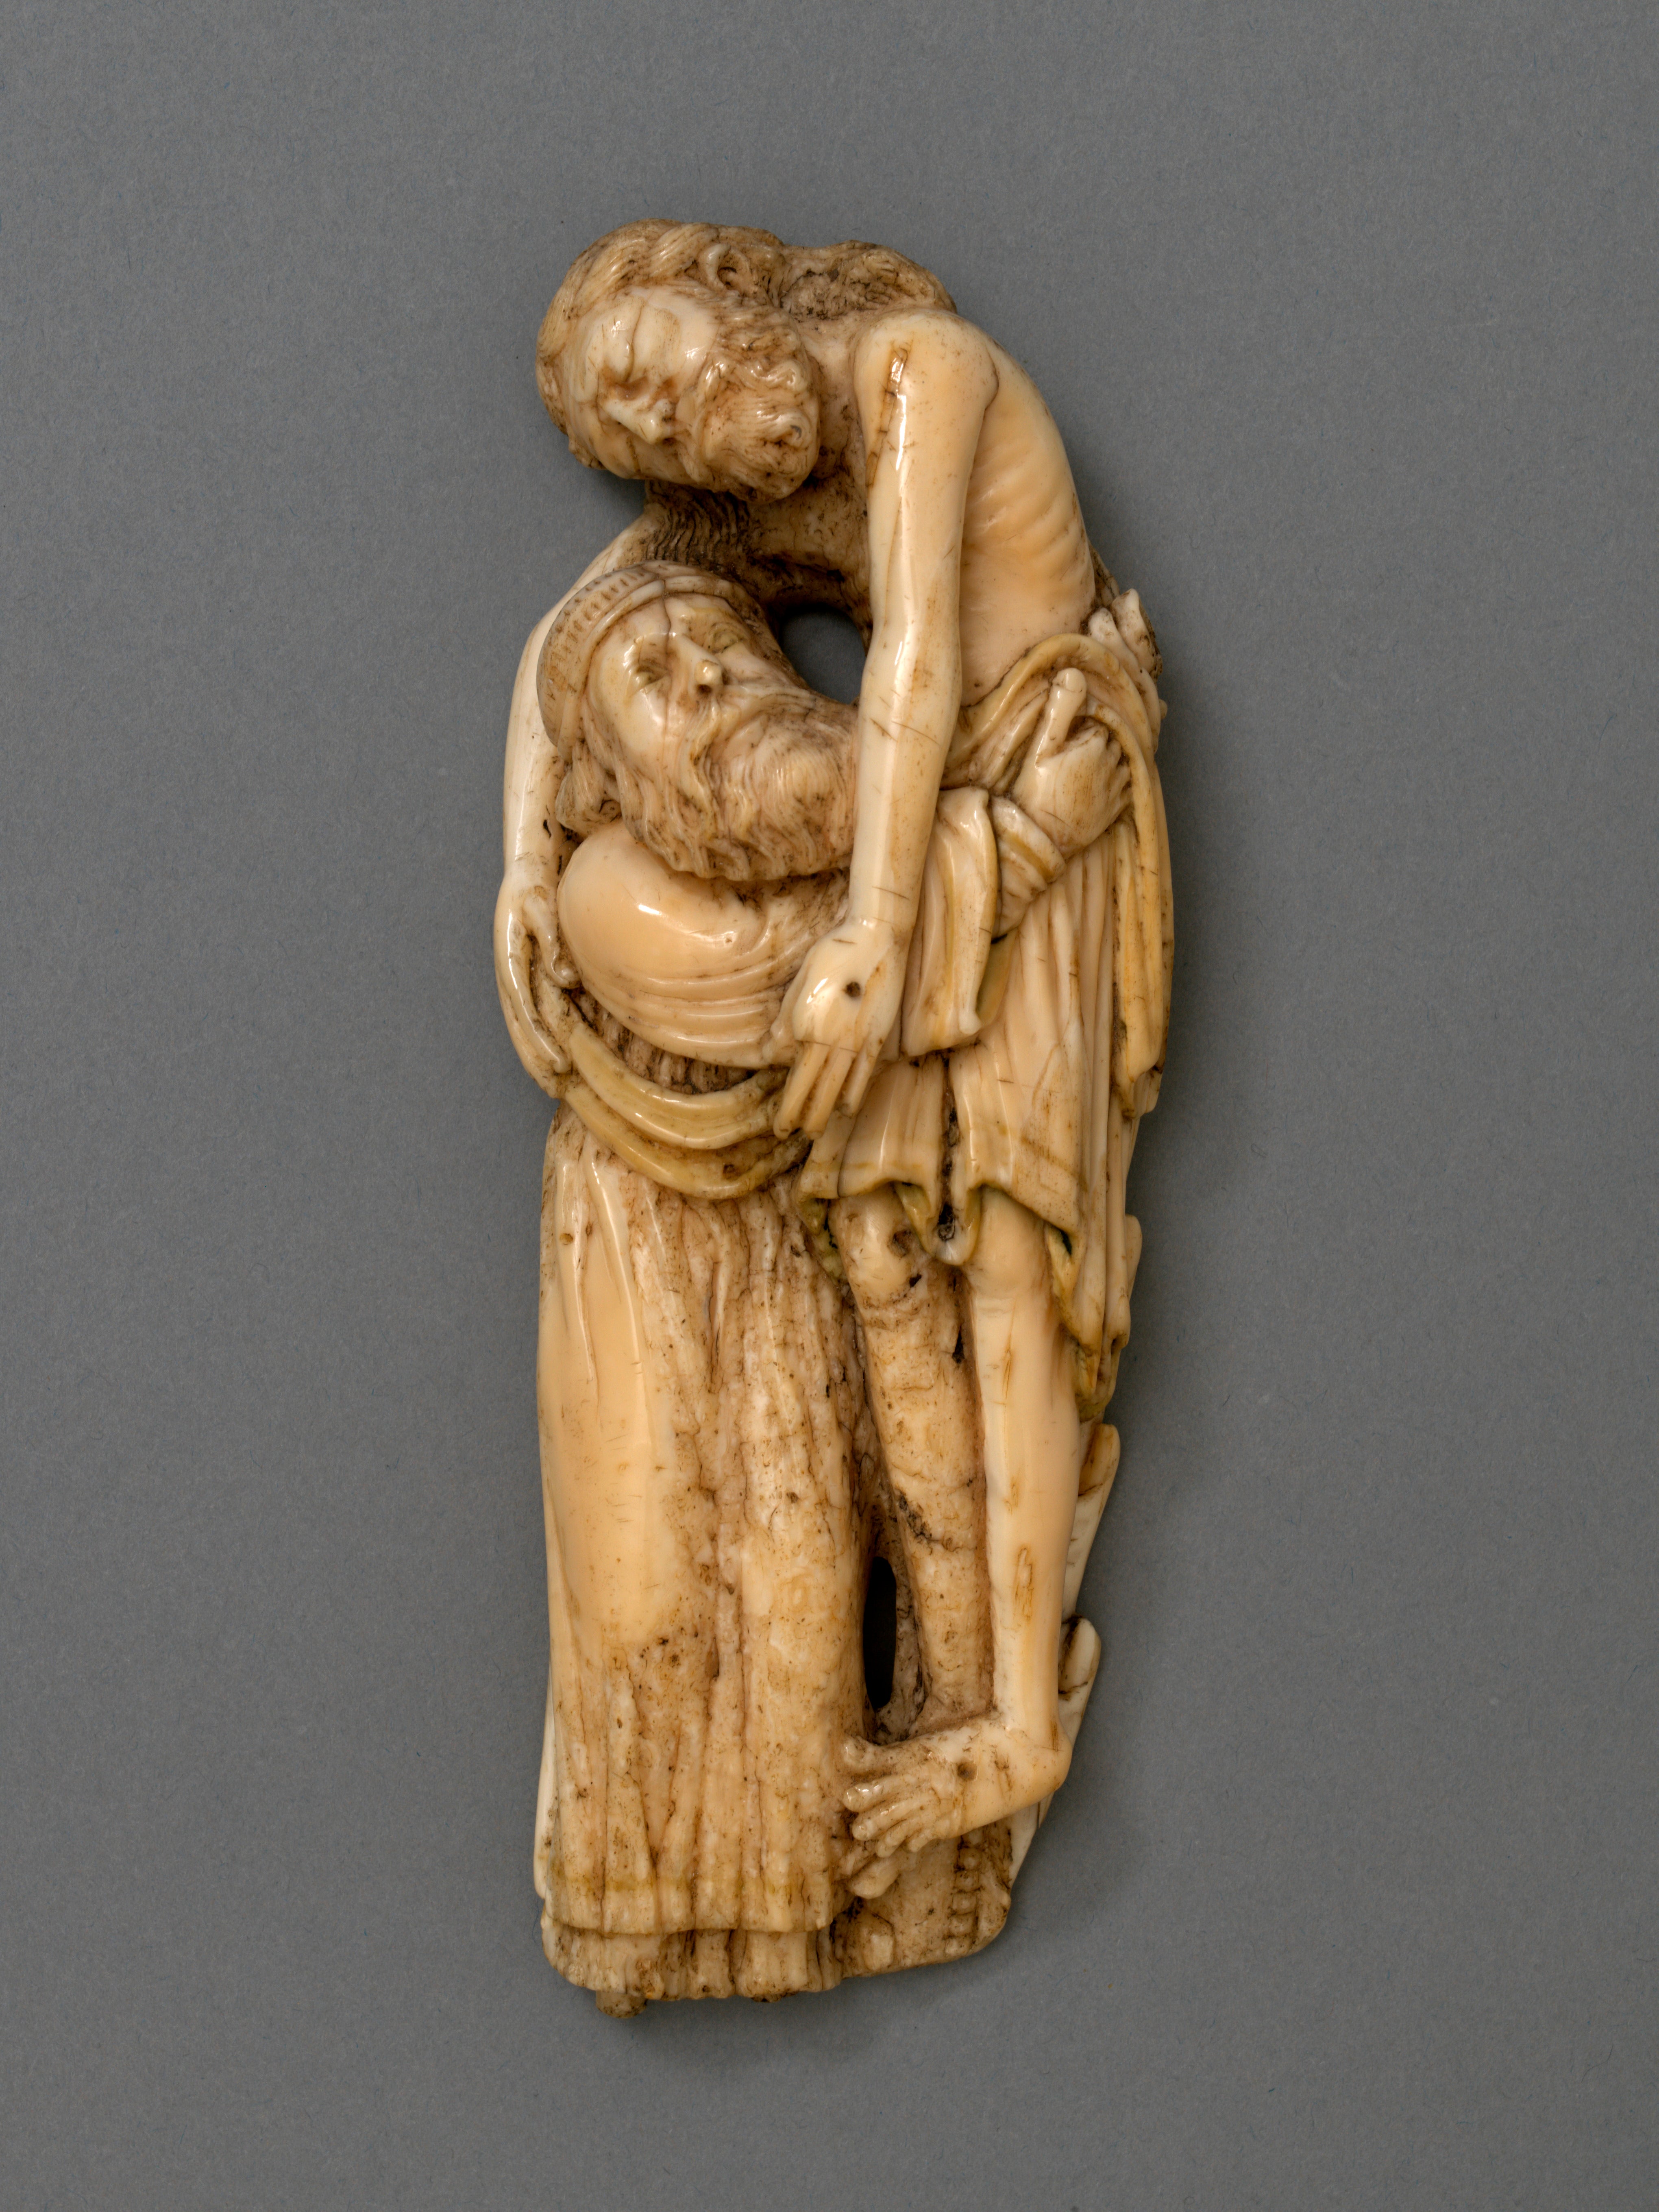 The ivory sculpture of Joseph of Arimathea taking Jesus down from the Cross (the deposition)